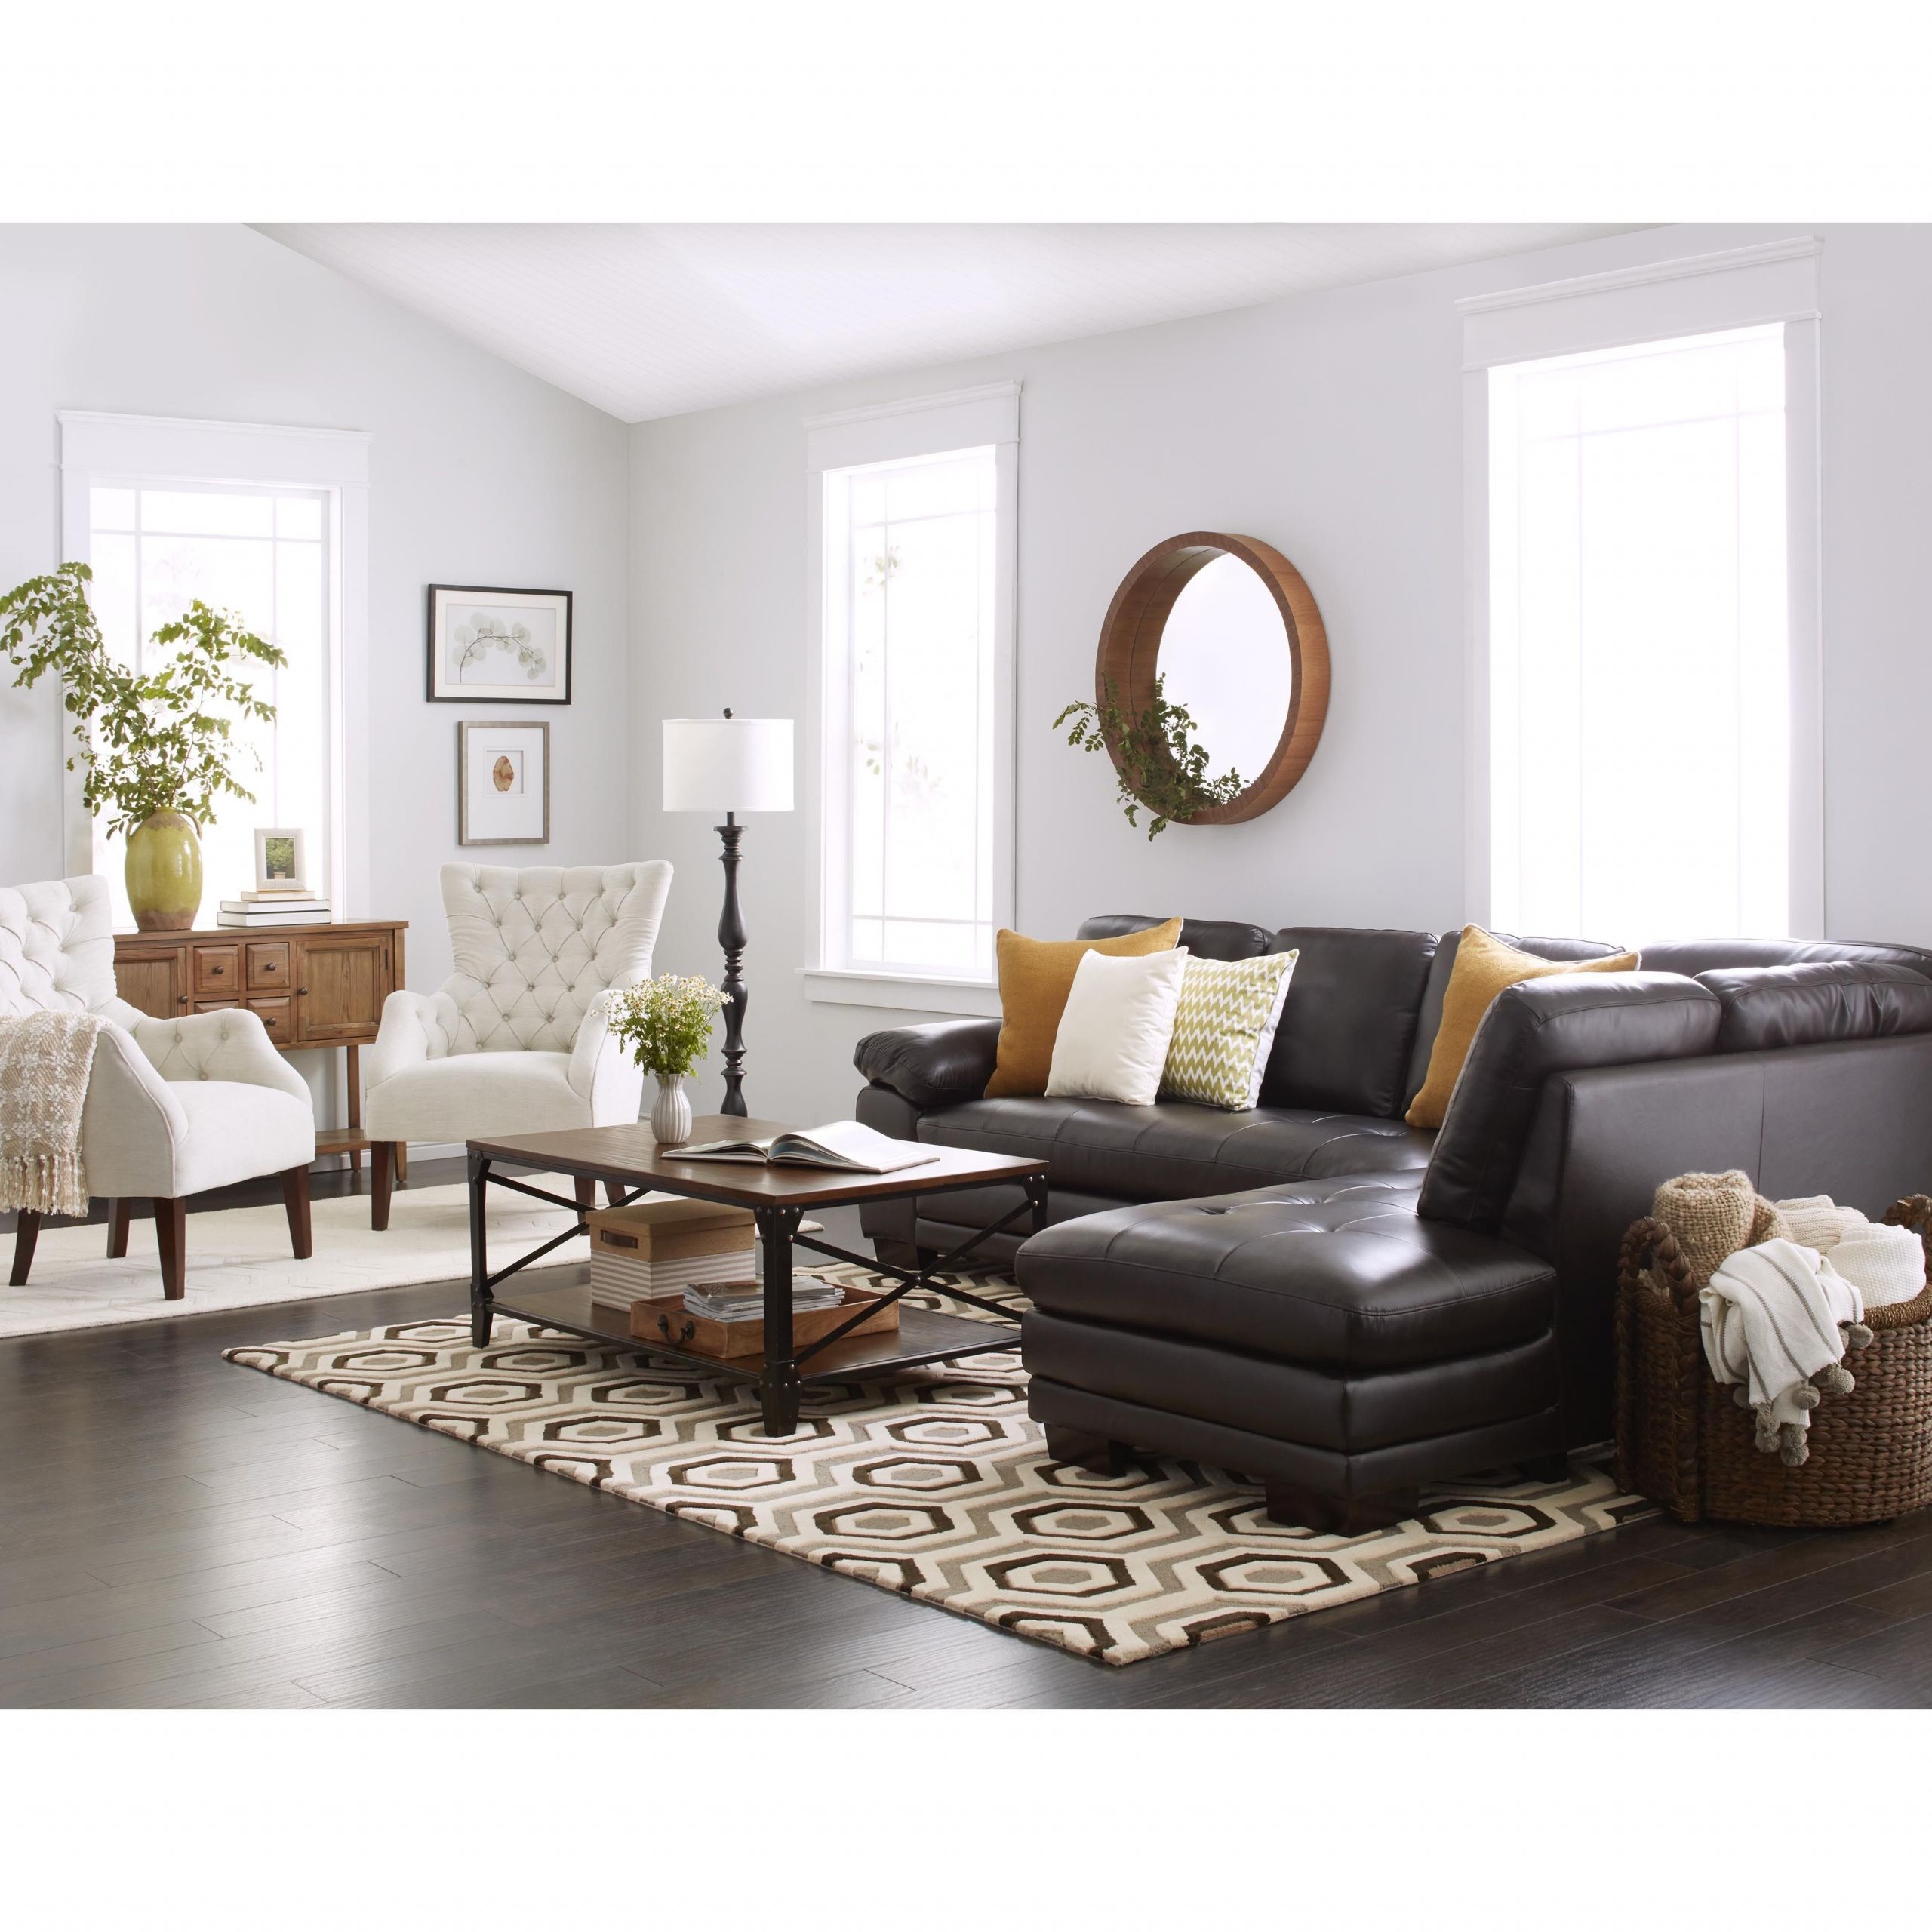 Brown Couches Living Room Ideas
 line Shopping Bedding Furniture Electronics Jewelry